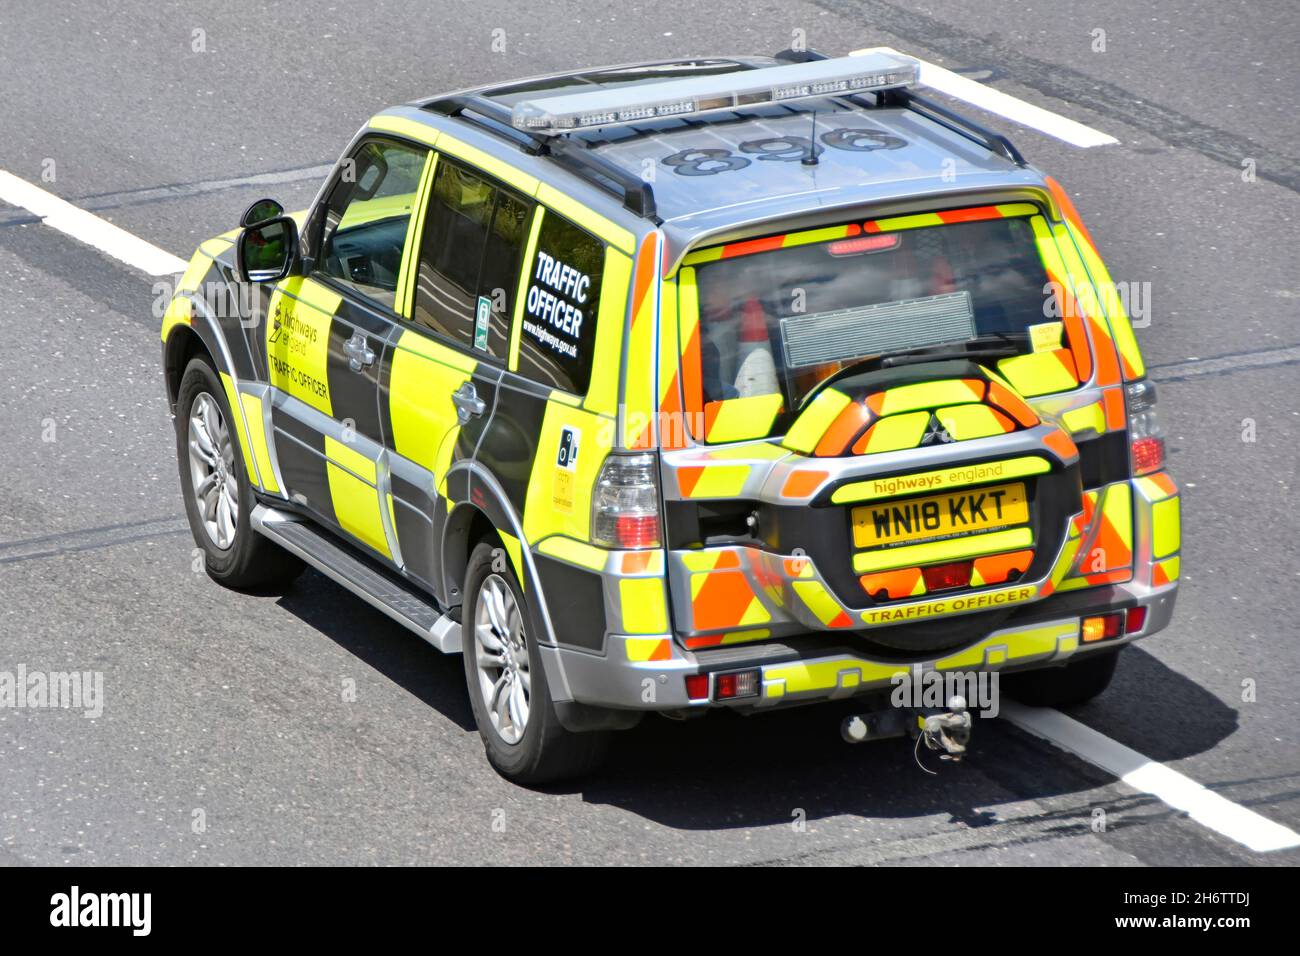 Aerial side and back view traffic officer driver inside high visibility patrol car signals to change lane driving along M25 motorway Essex England UK Stock Photo